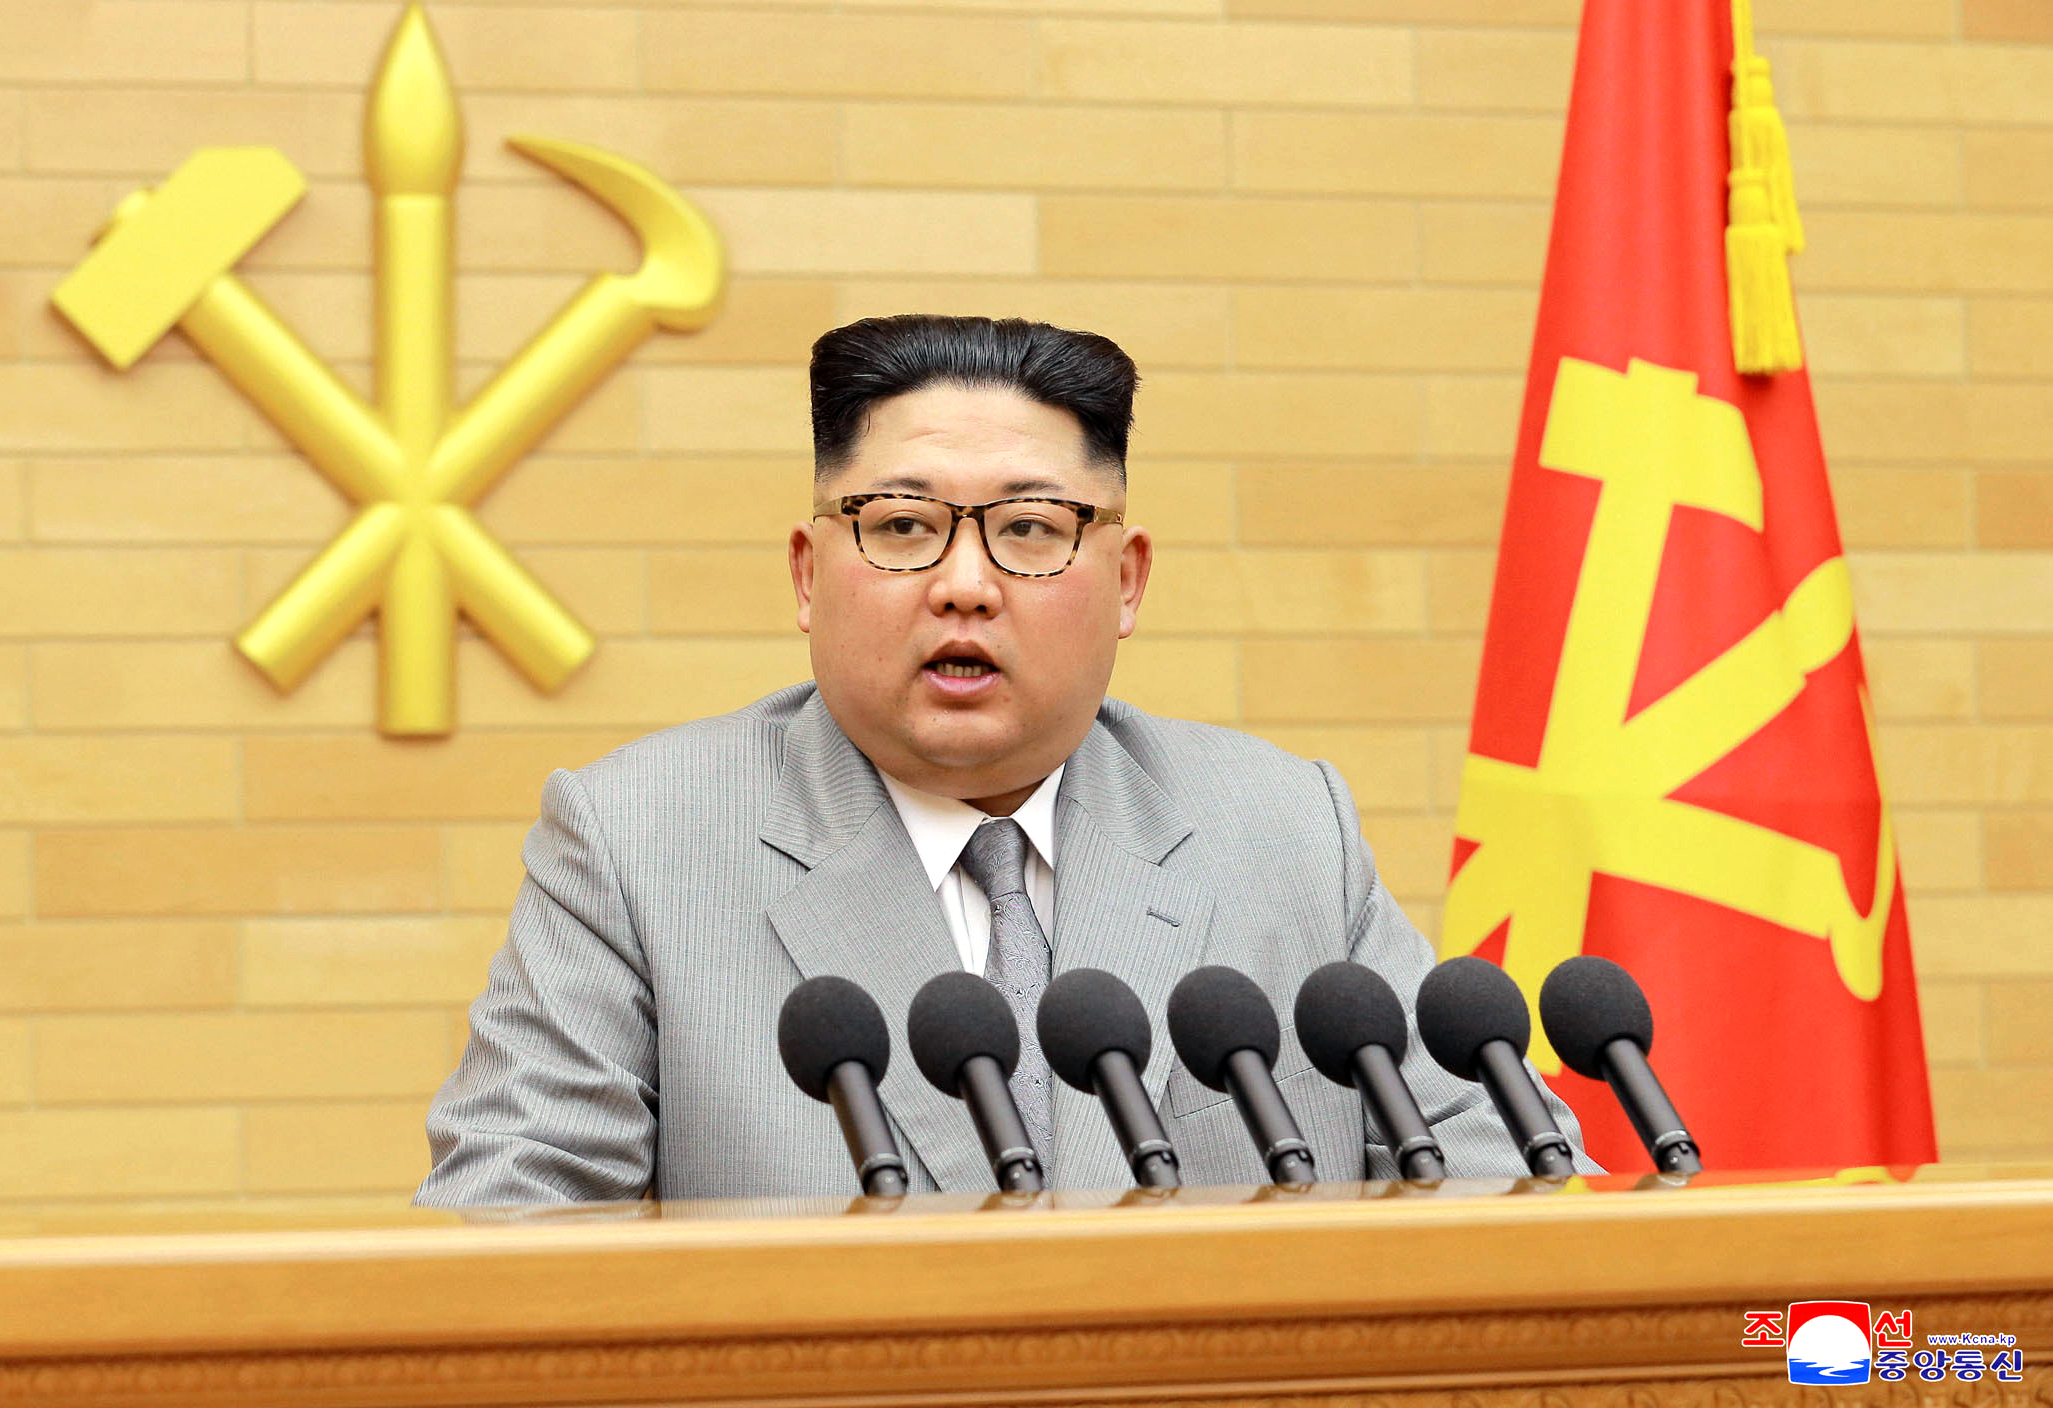 PHOTO: North Korean leader Kim Jong Un delivers his New Year's speech at an undisclosed place in North Korea, Jan. 1, 2018, in this photo provided by the North Korean government.